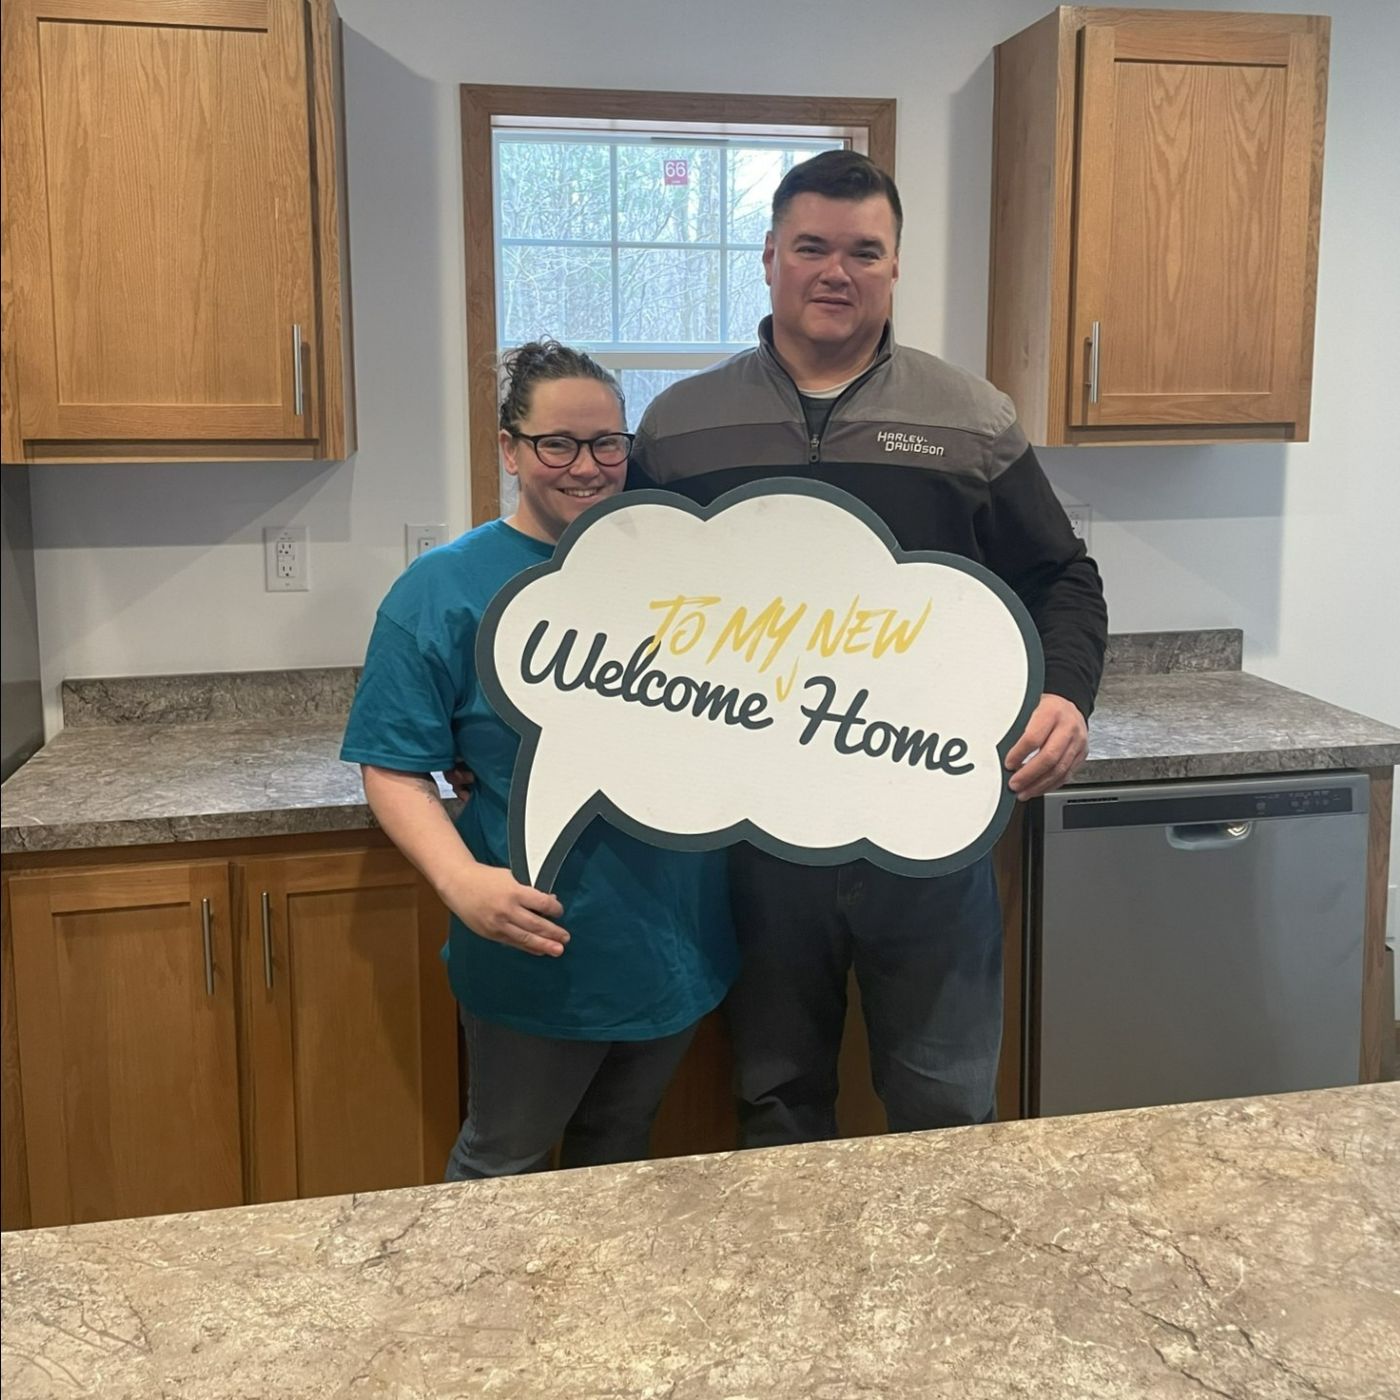 STEPHEN R. welcome home image